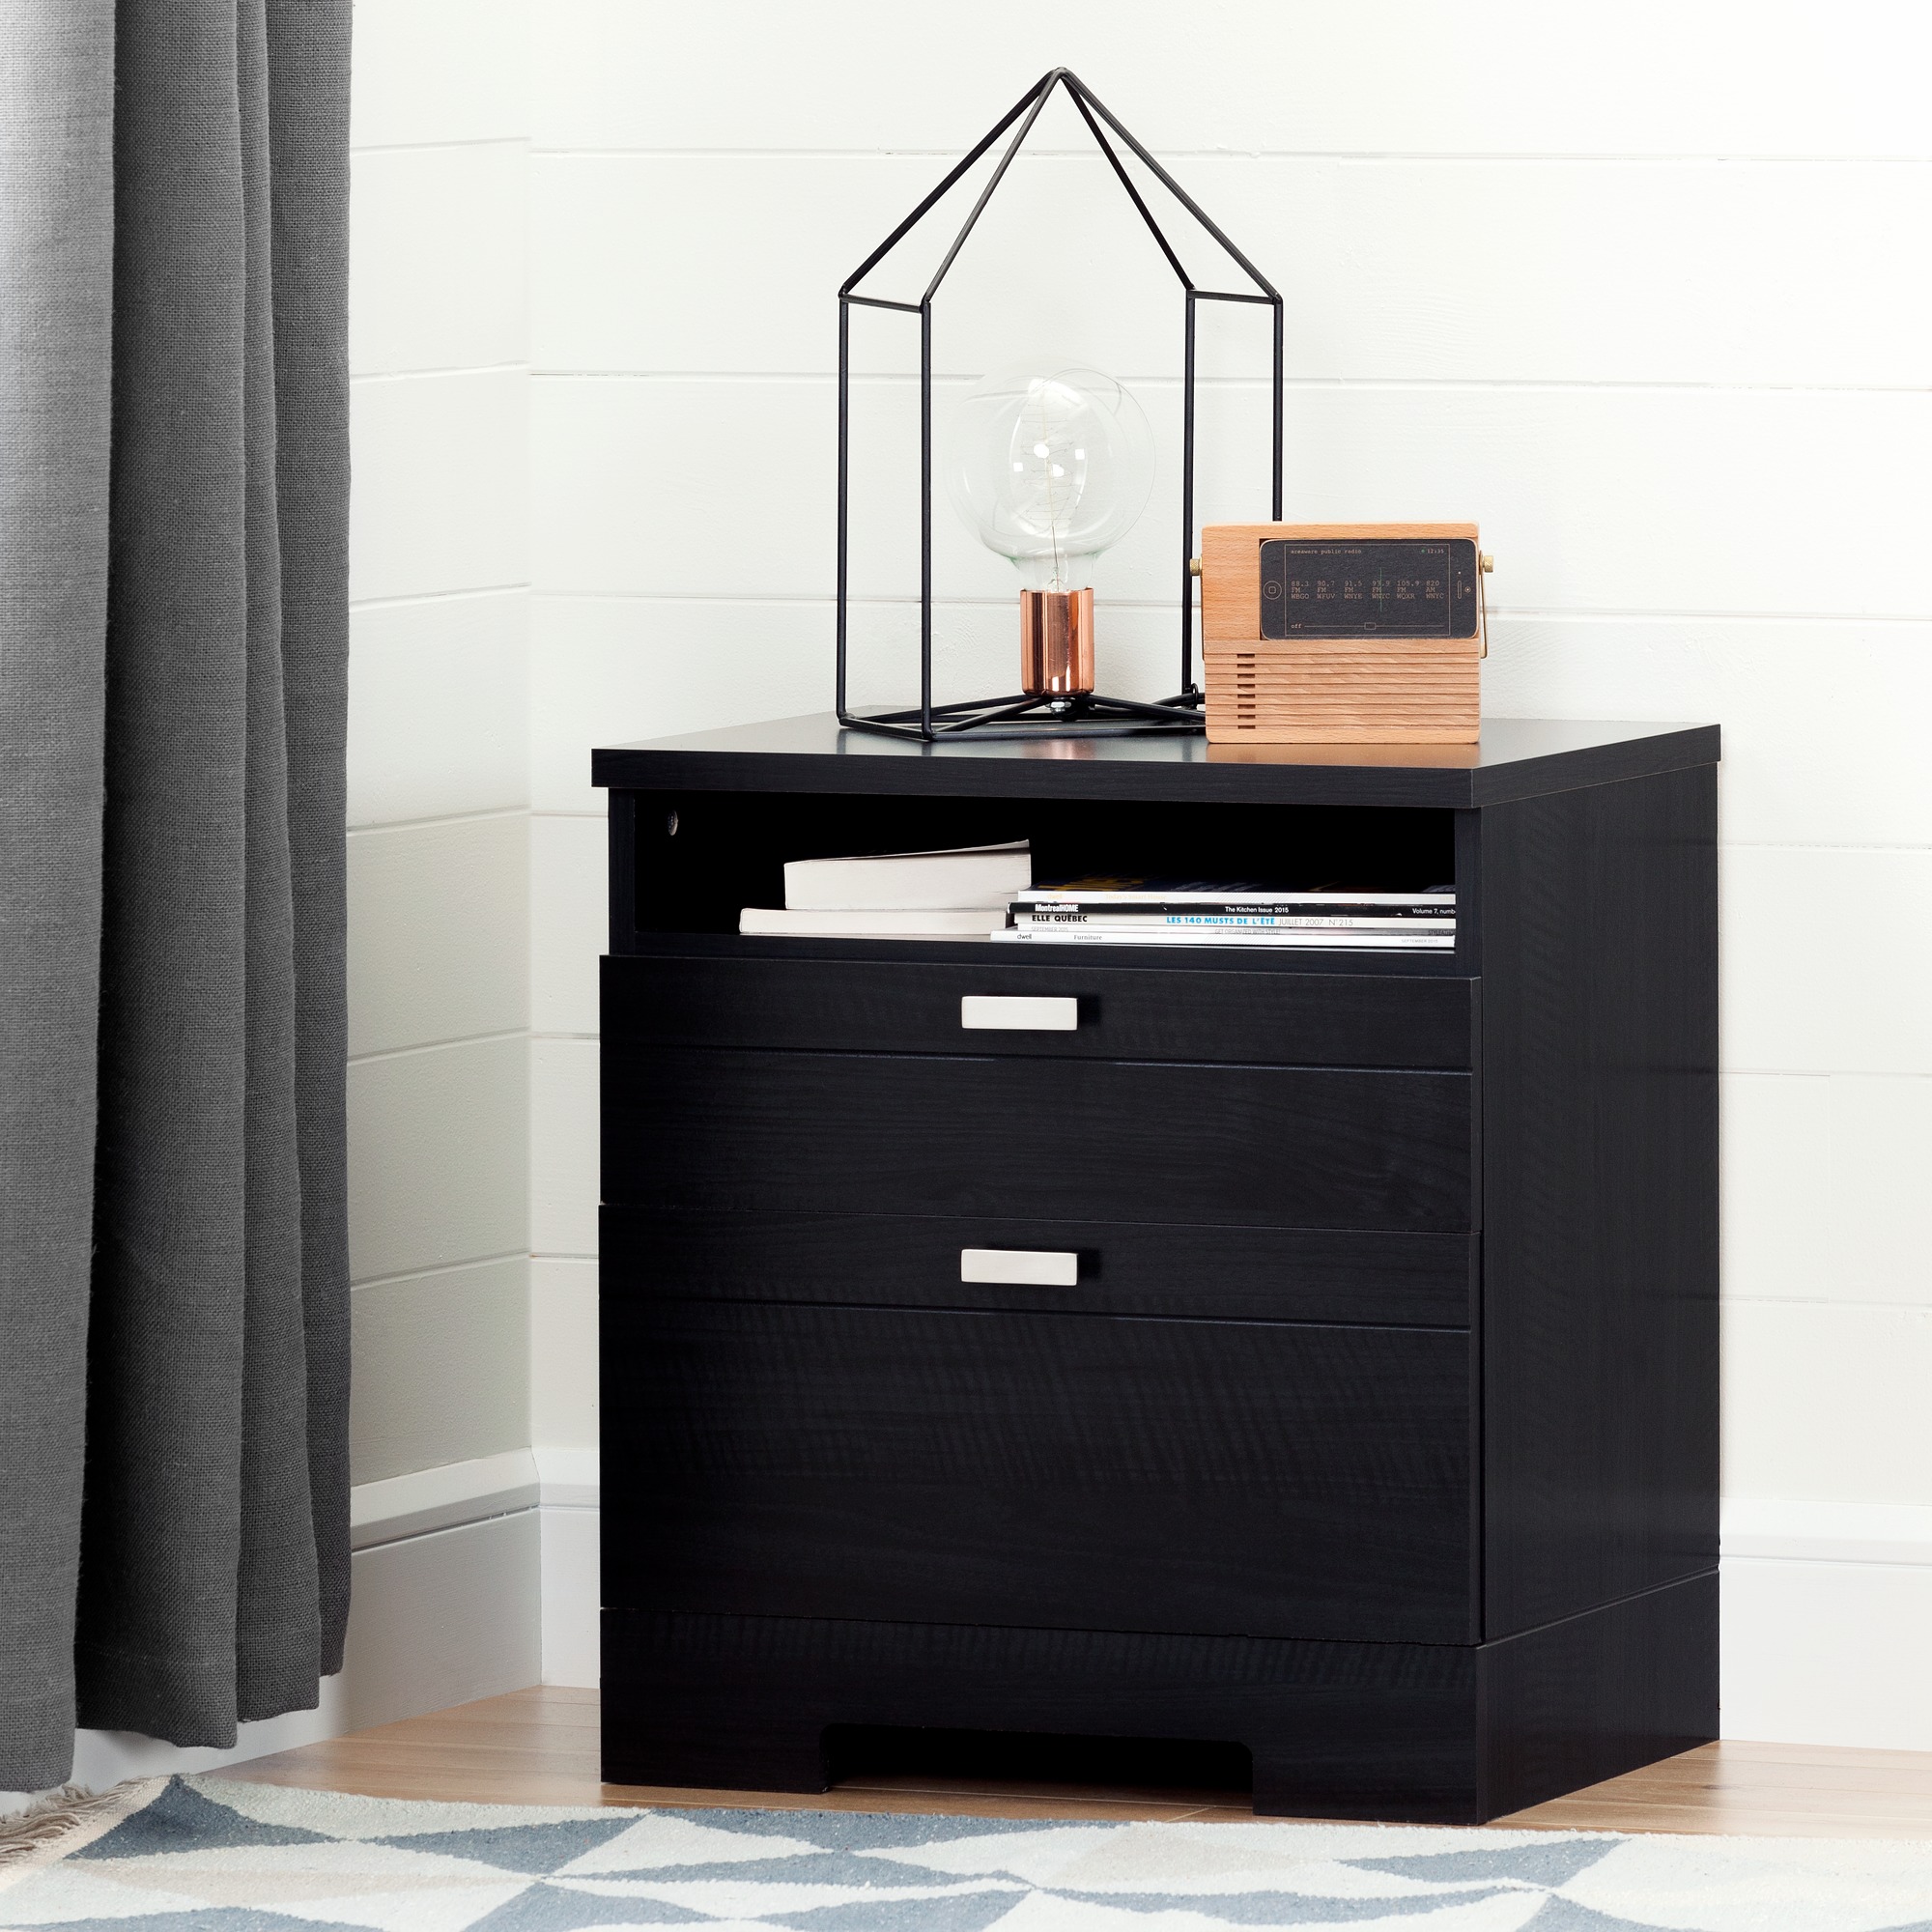 South Shore Reevo Nightstand with Drawers and Cord Catcher, Black Onyx